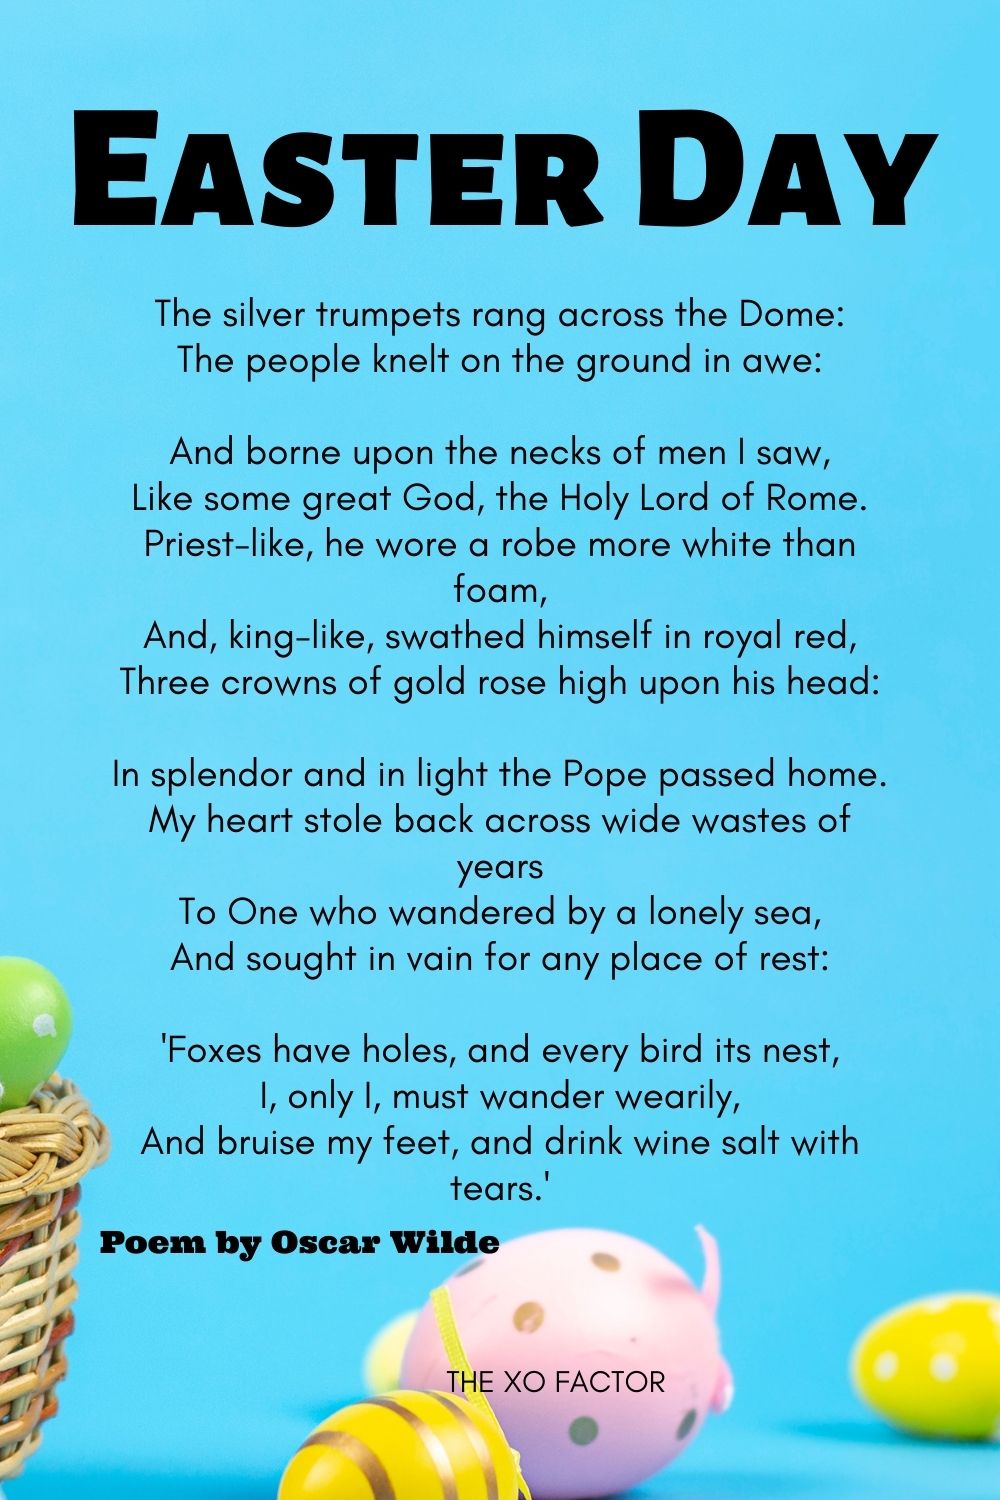 Easter Day Poem by Oscar Wilde